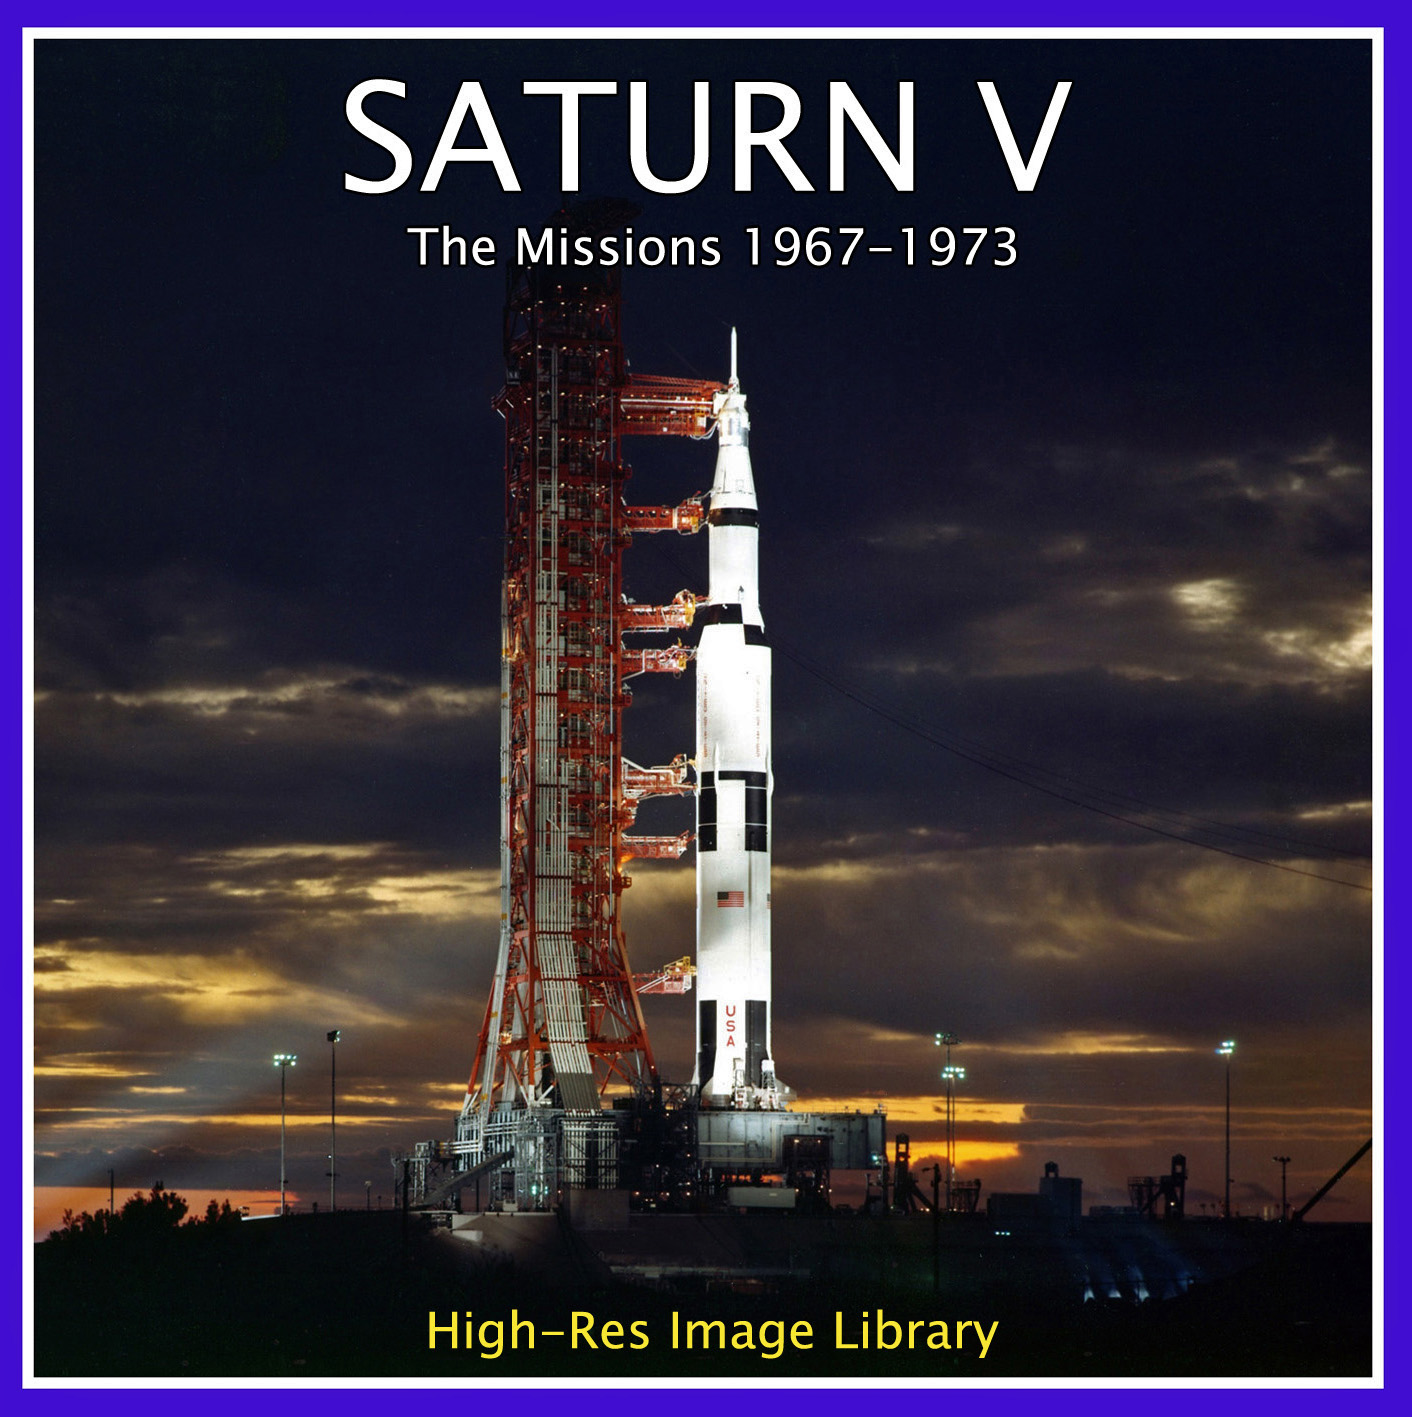 Saturn V Retro Space Images cover posted on AmericaSpace